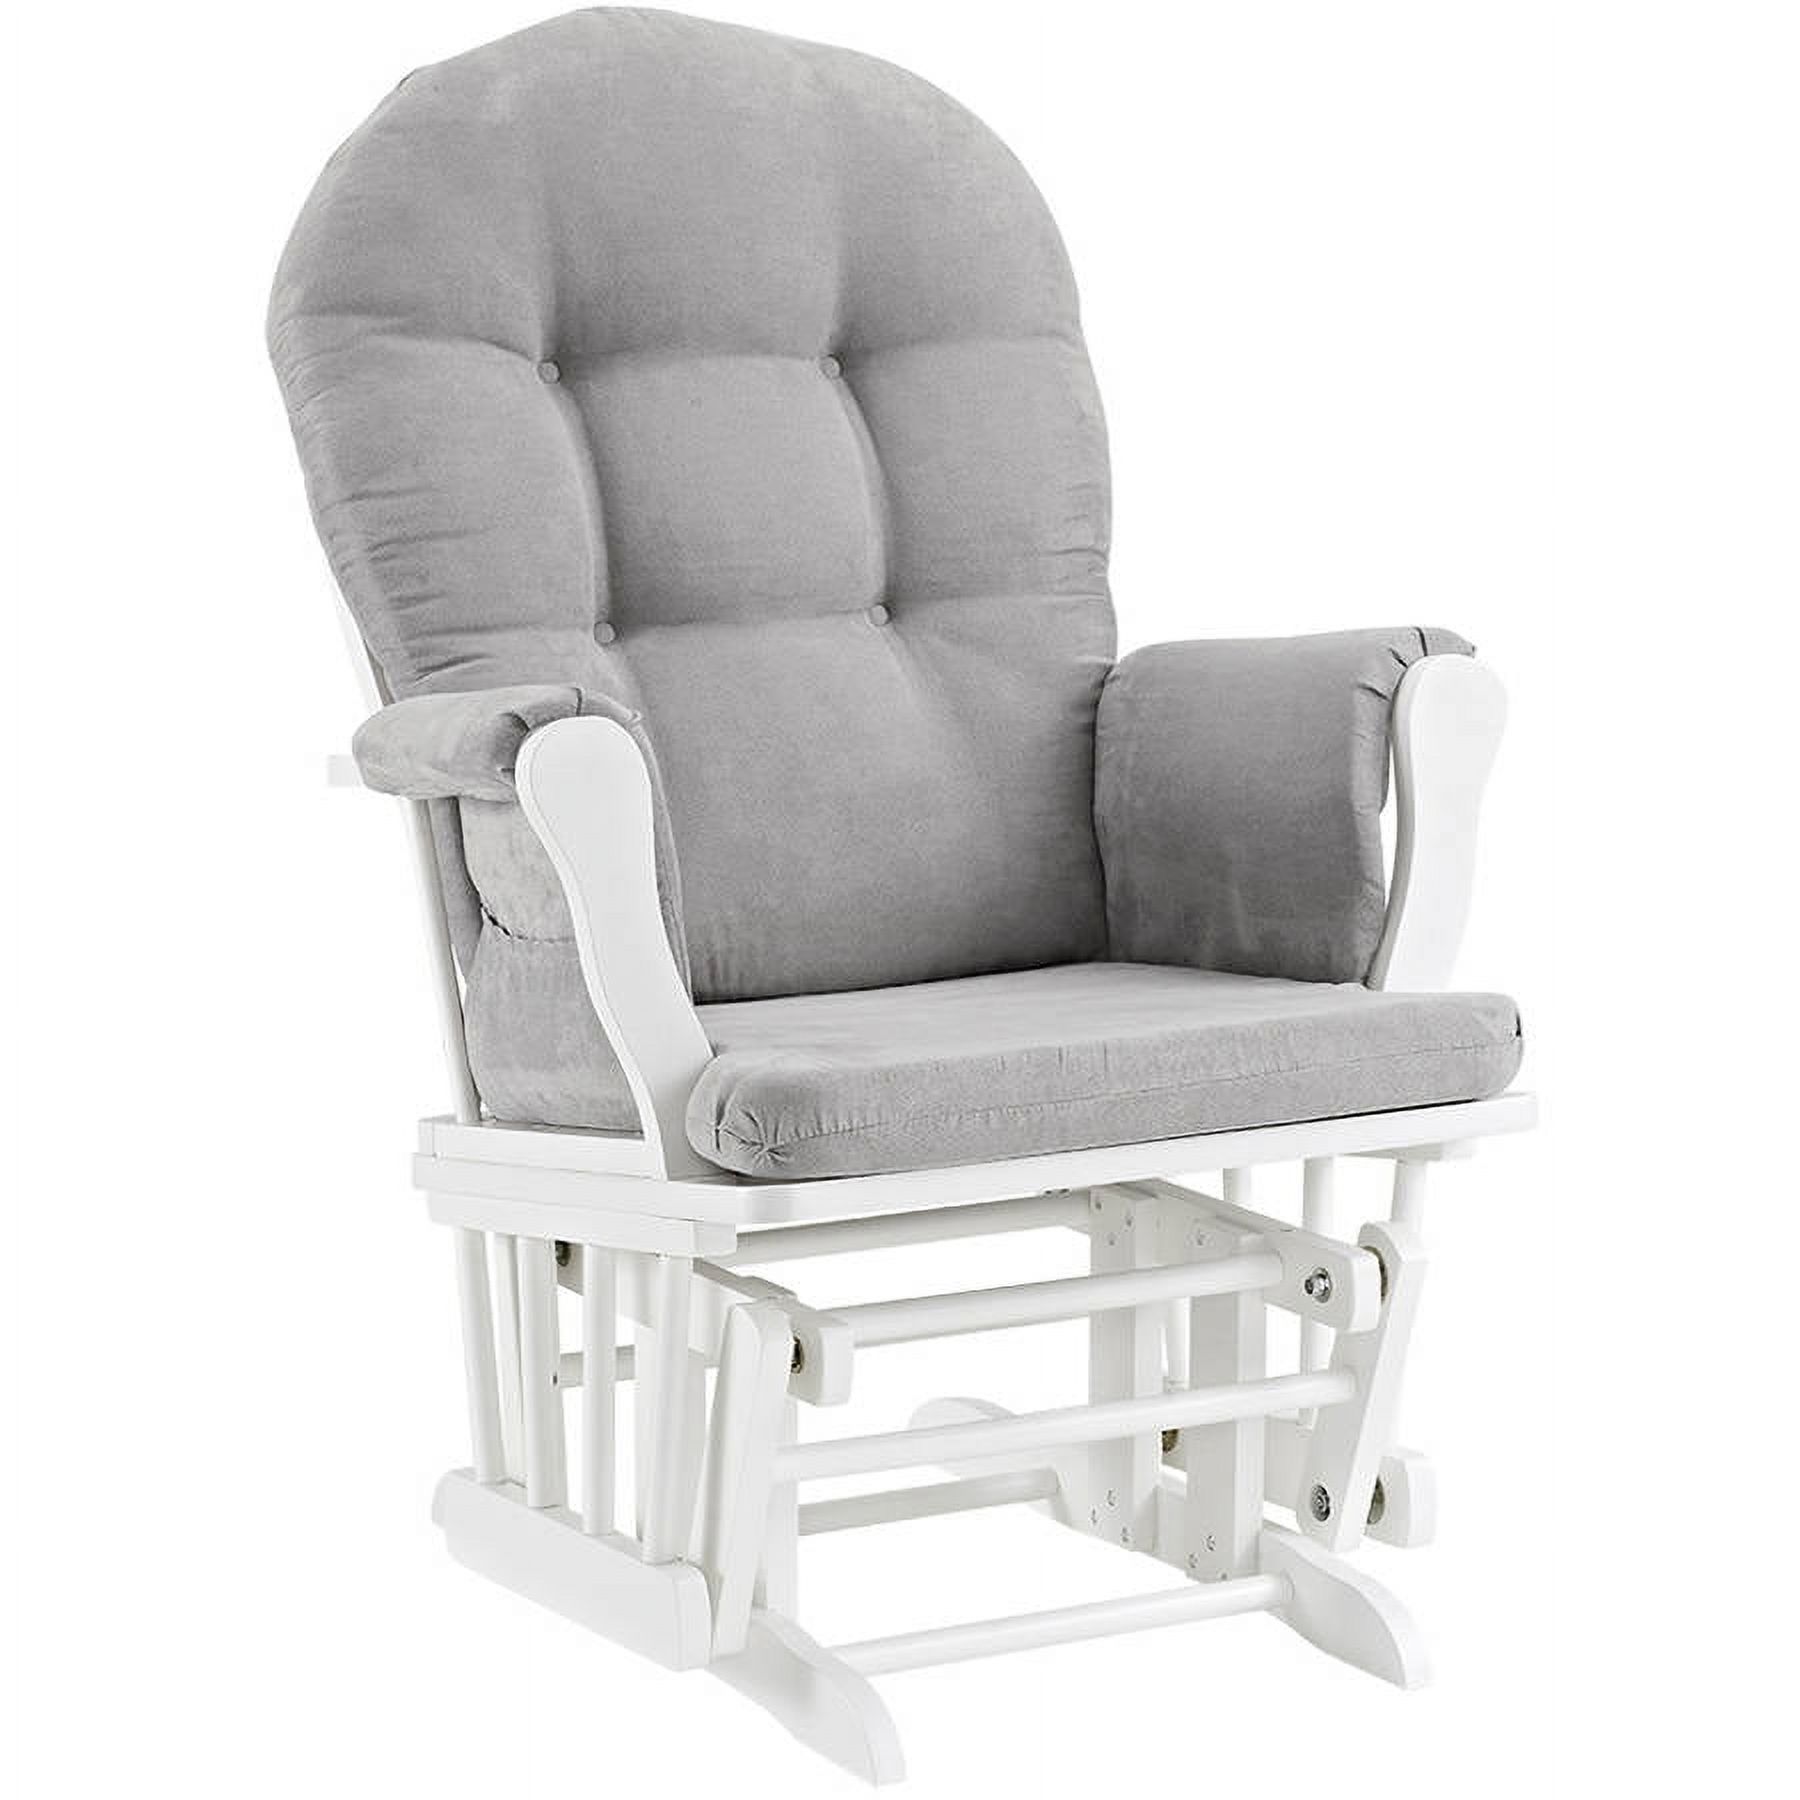 Angel Line Windsor Glider and Ottoman, White Finish with Gray Cushions - image 5 of 6